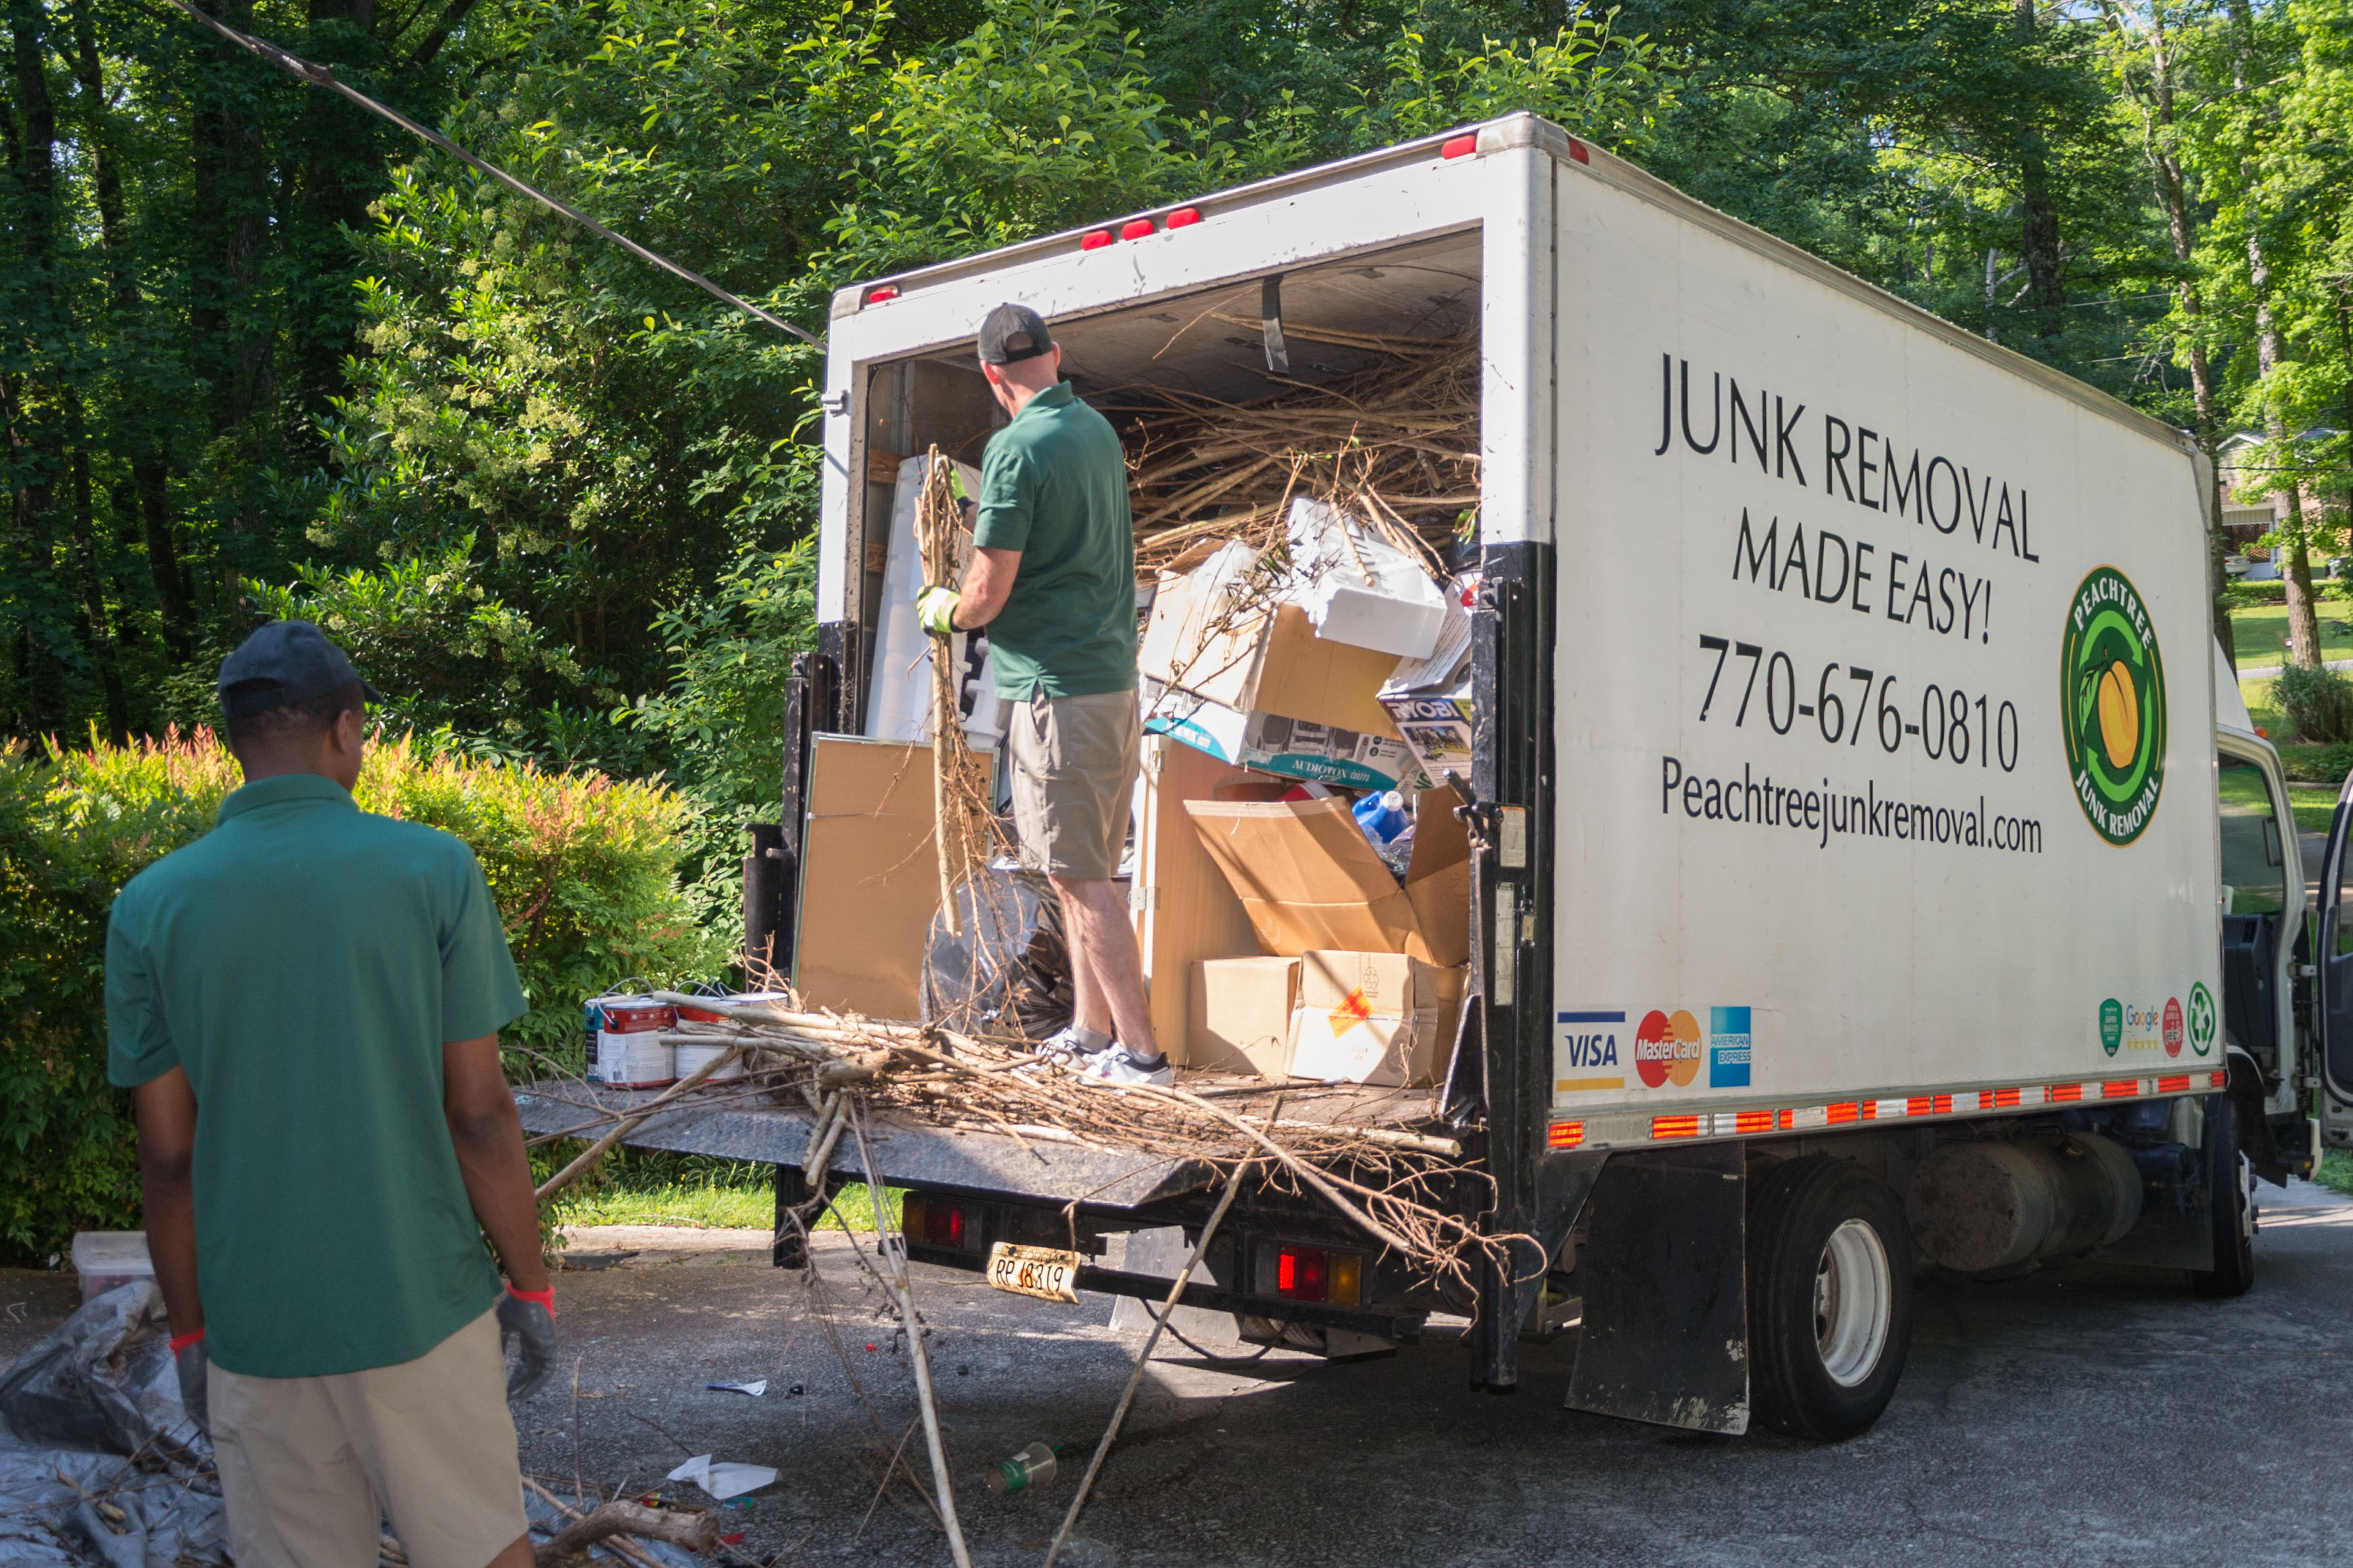 Top Rated Junk Removal & Dumpster Rental Services in Massachusetts